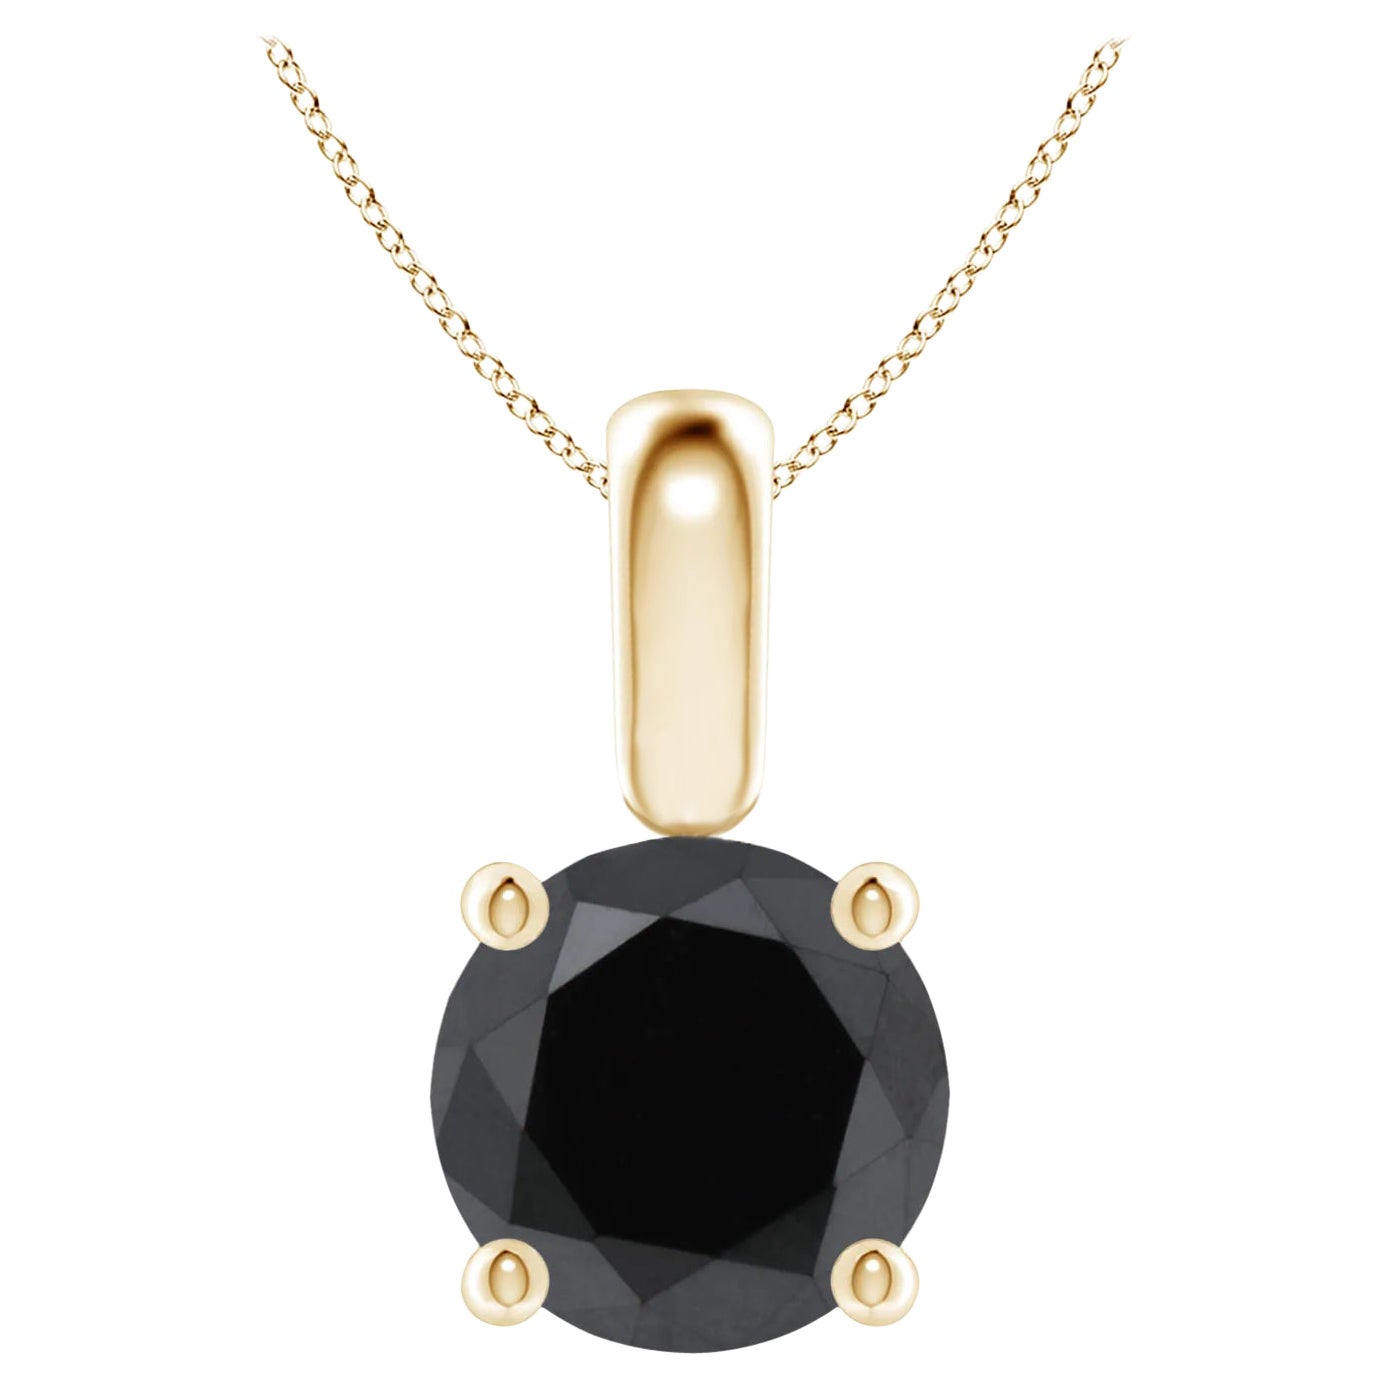 1.92 Carat Round Black Diamond Solitaire Pendant Necklace in 14K Yellow Gold